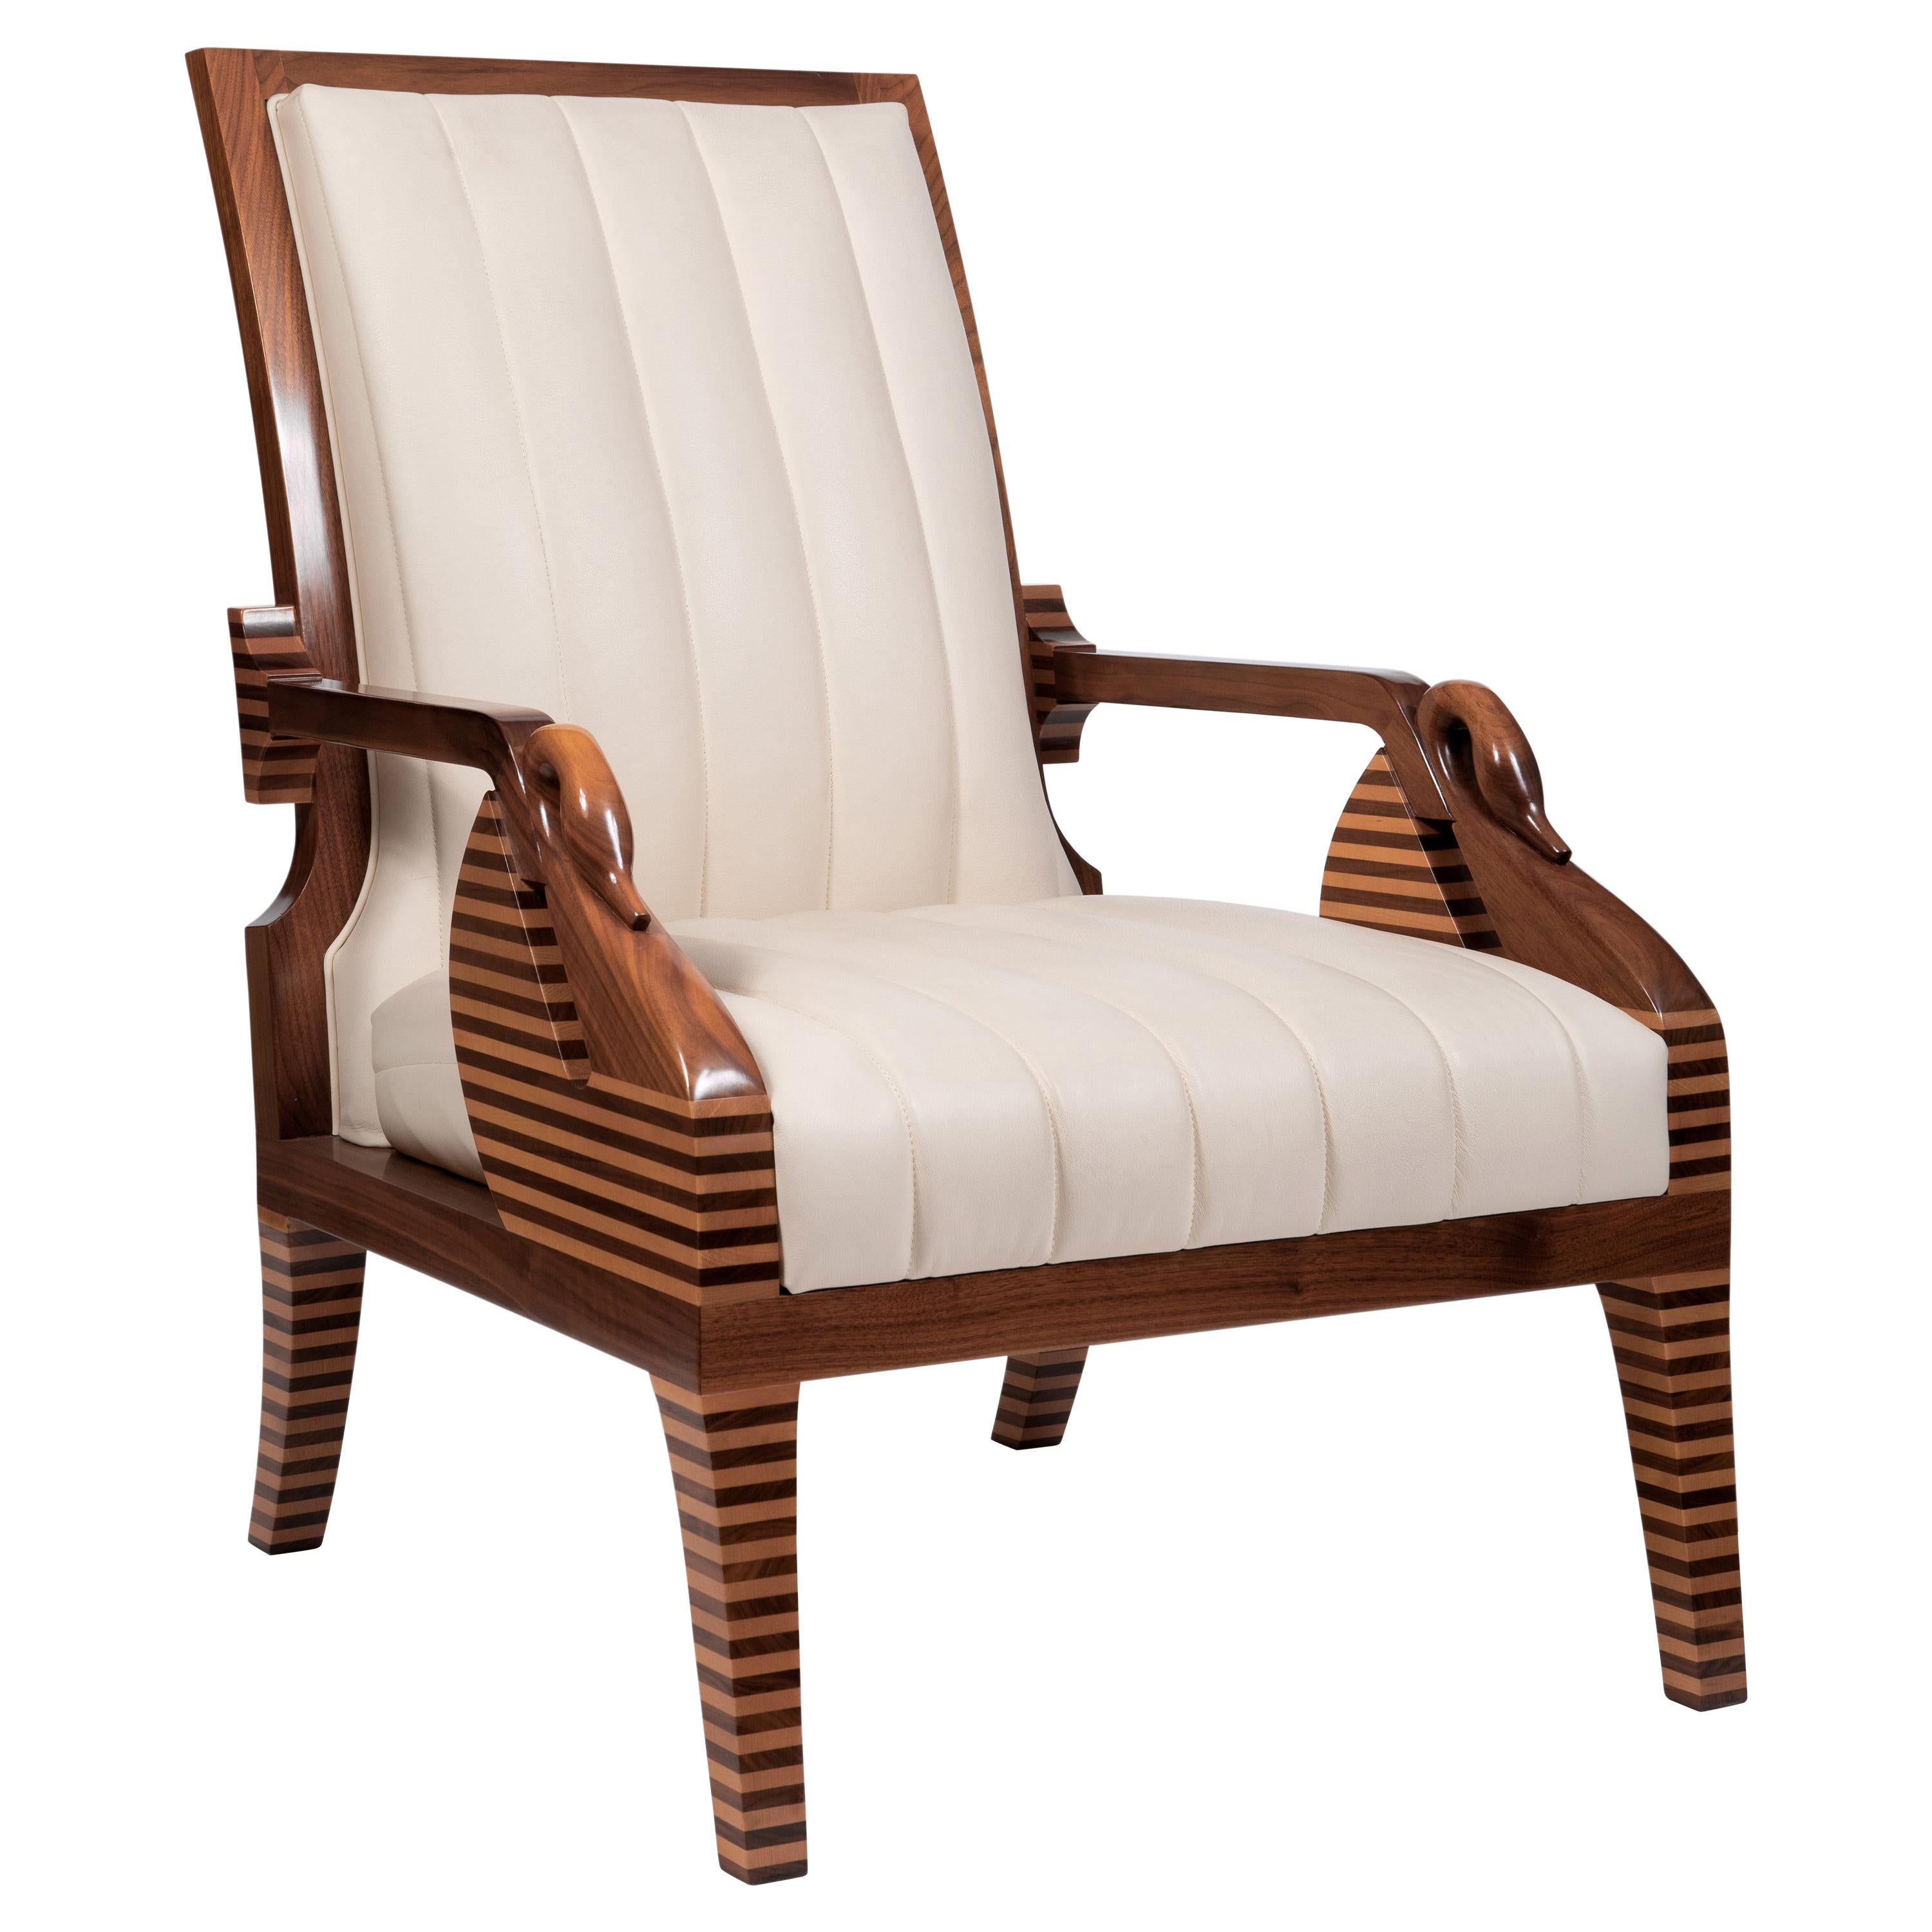 Walnut and Maple Wood Modern Armchair with Decorative Swans, Made in Italy